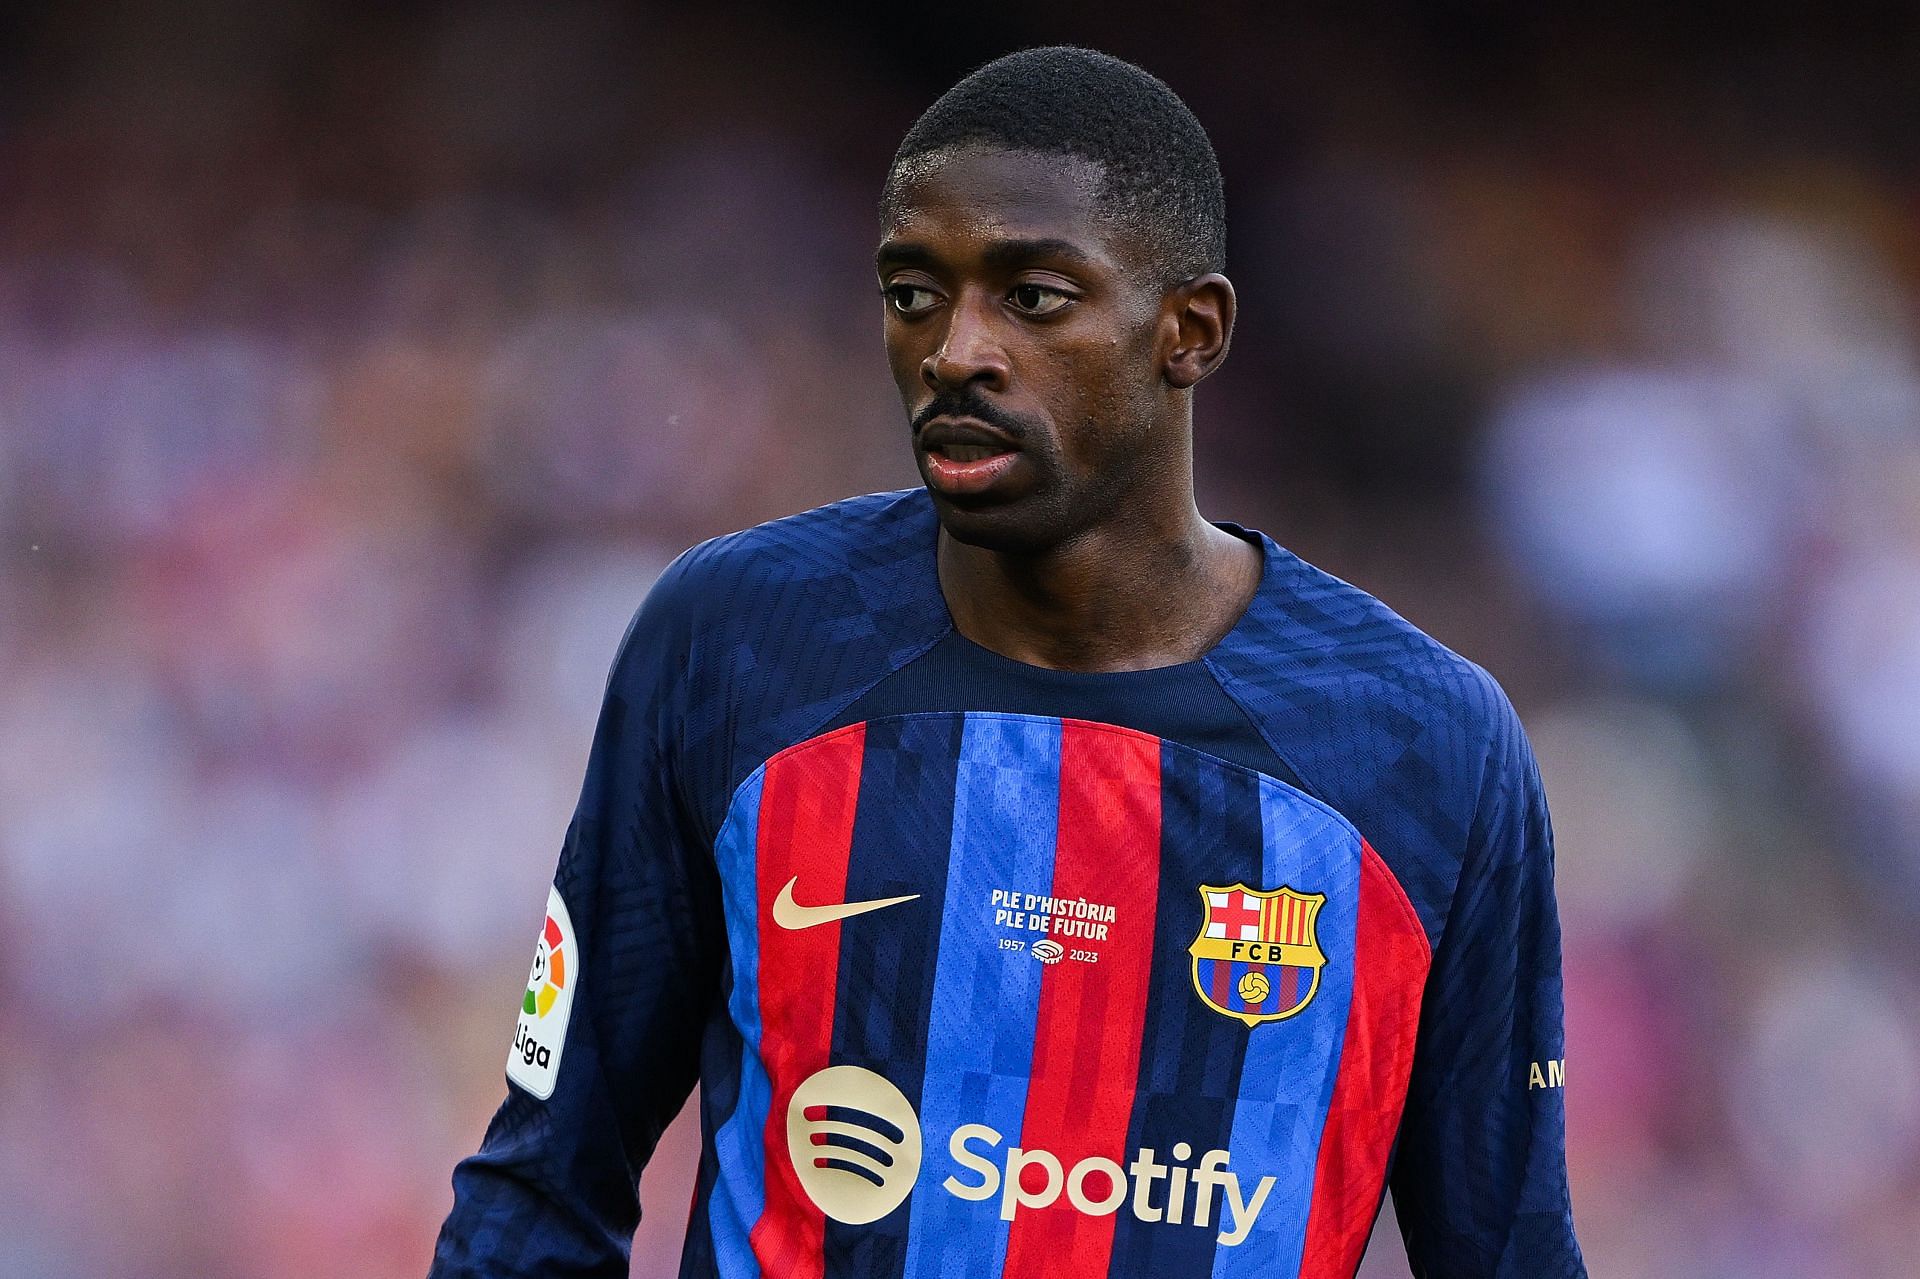 Ousmane Dembele was sold to PSG